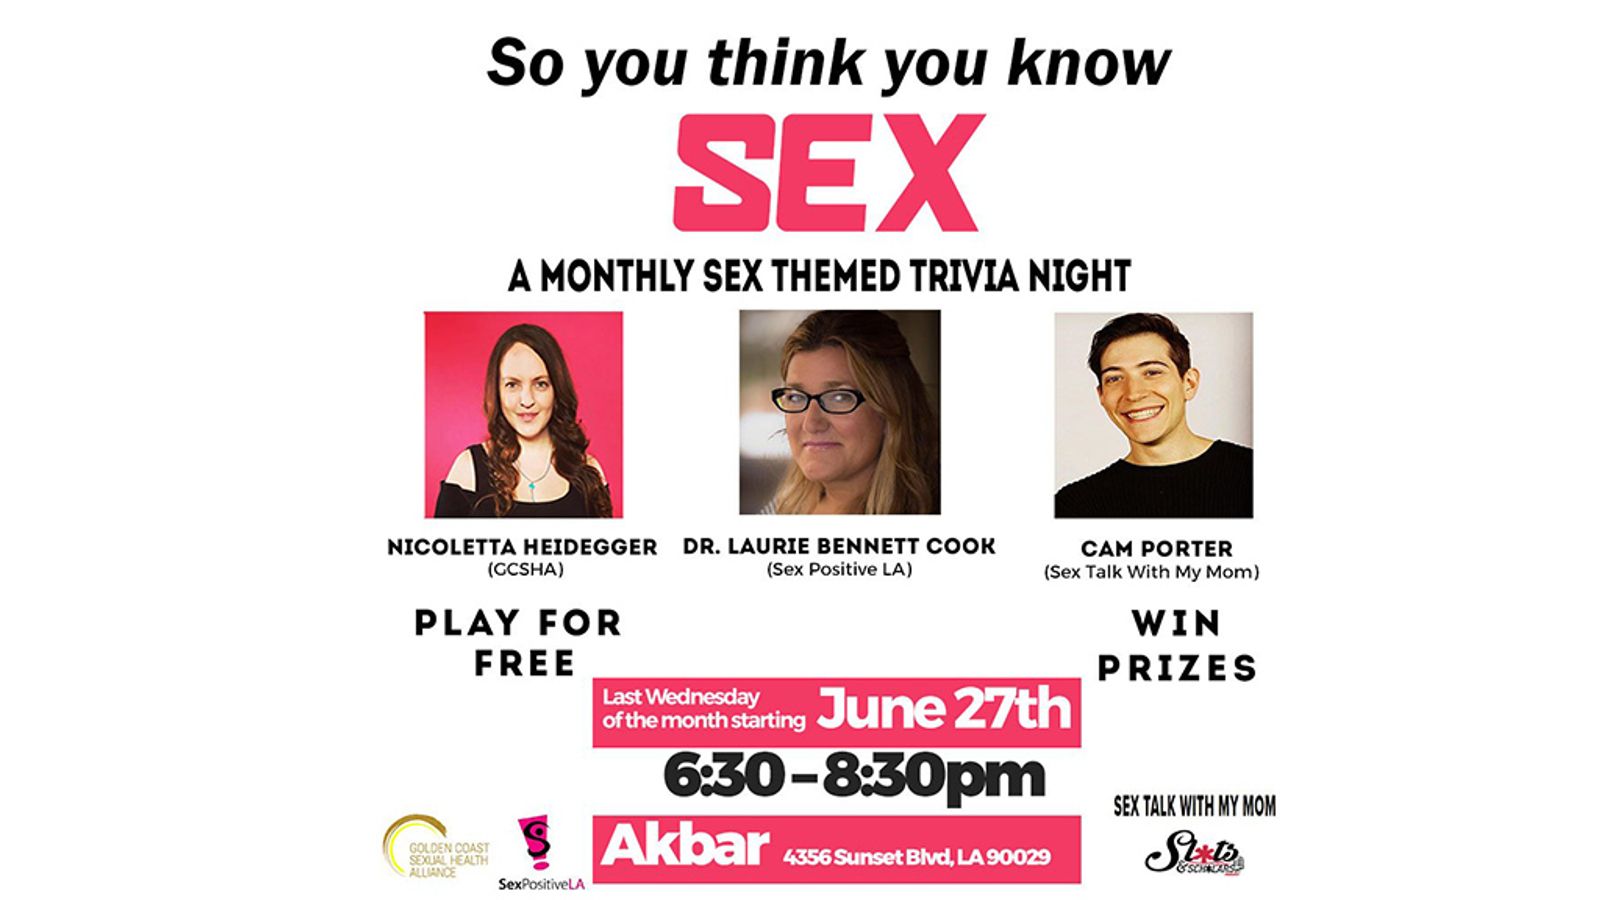 So You Think You Know Sex? Find Out Wed. At Monthly Trivia Night